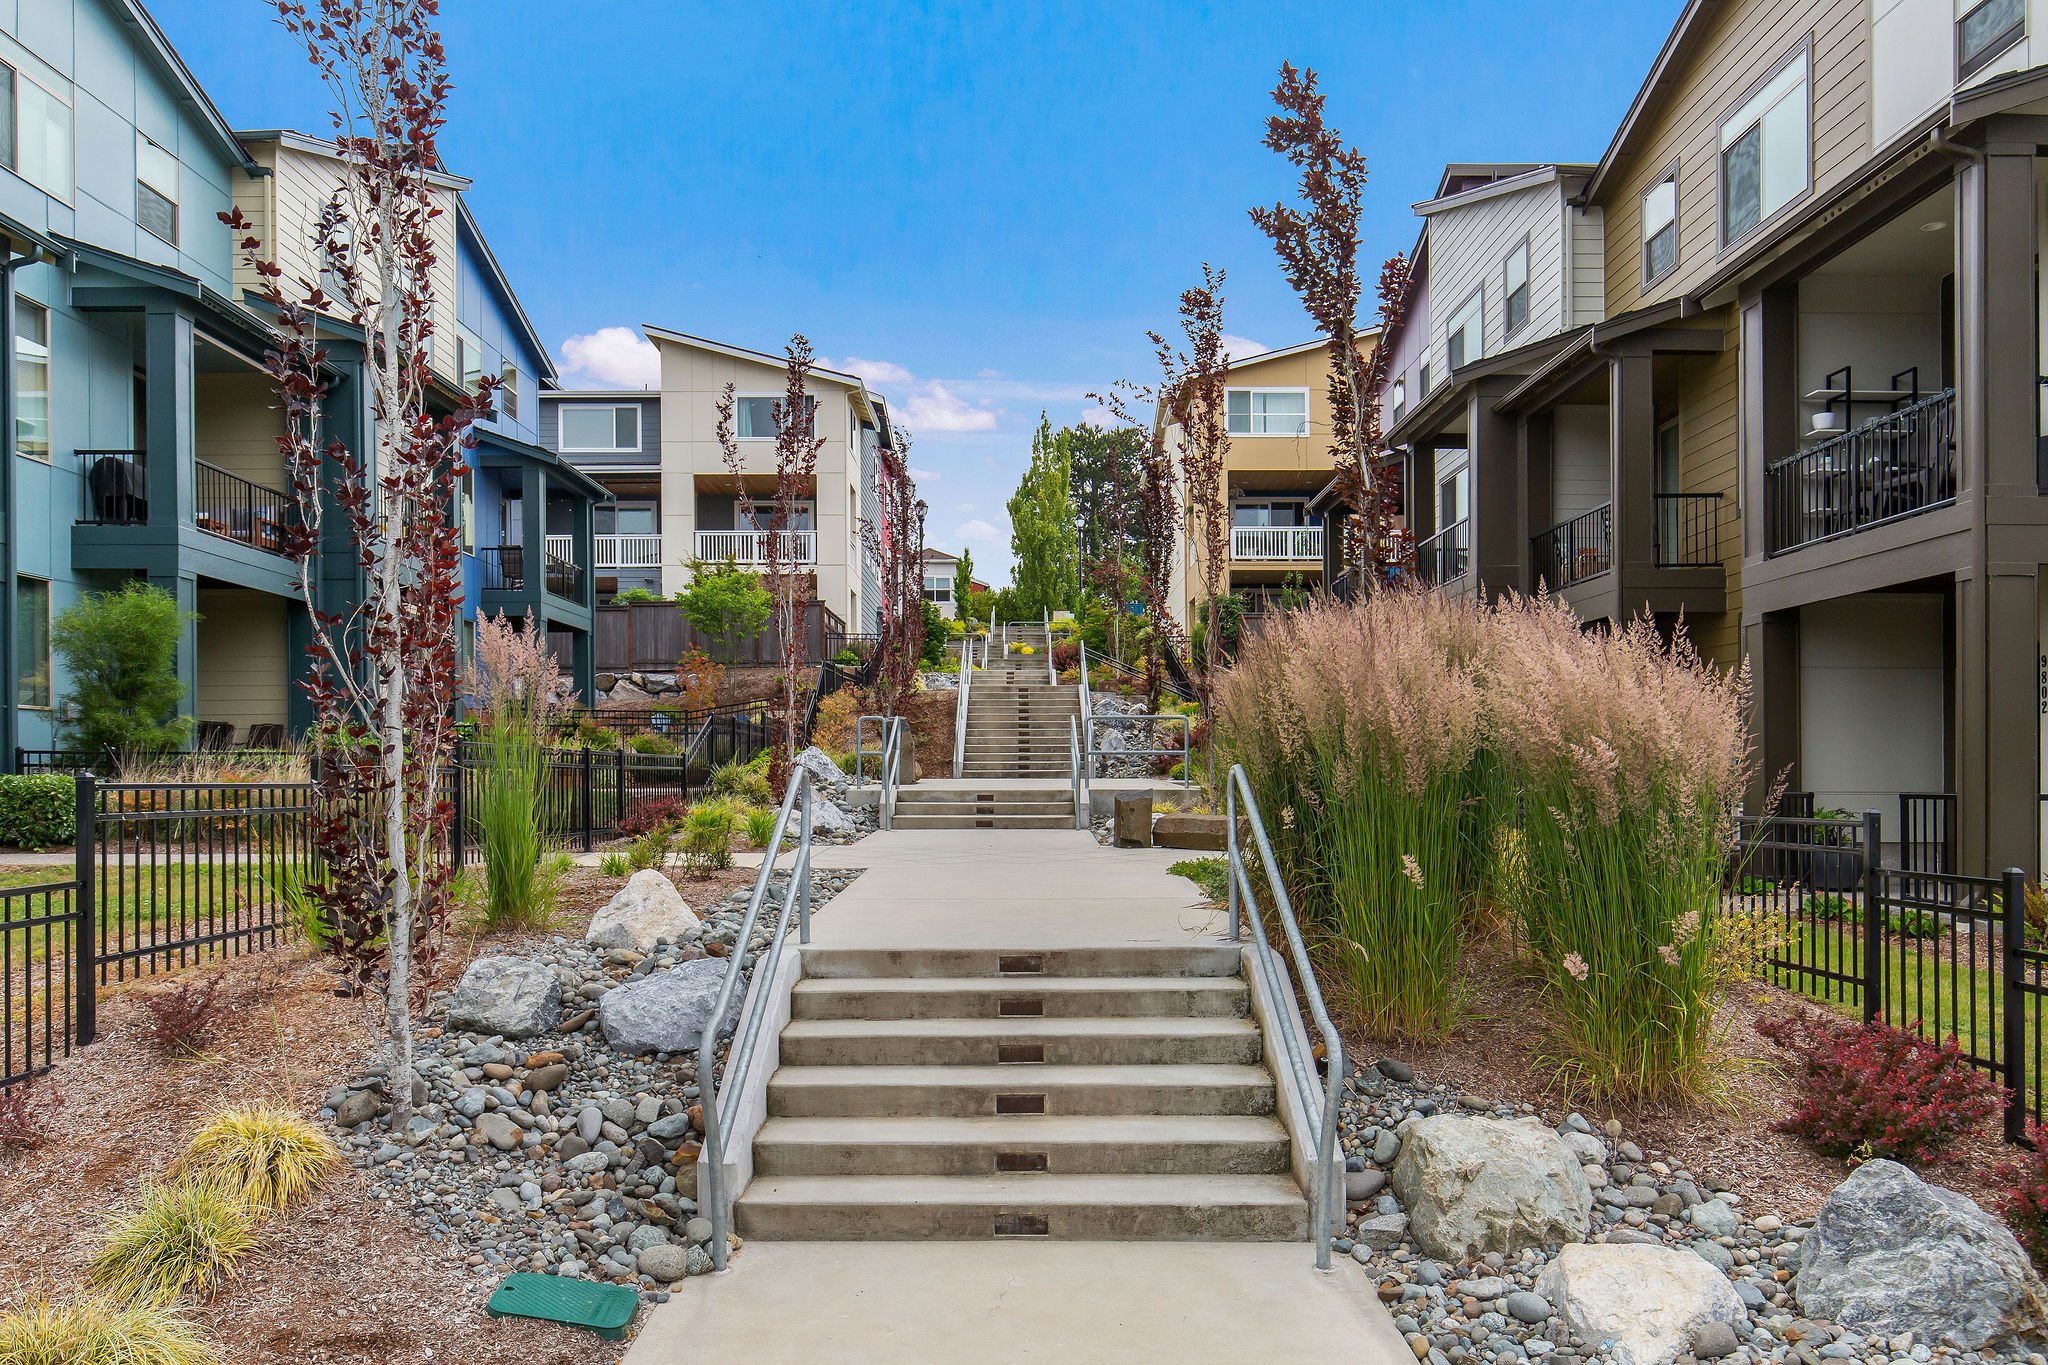  image description: view of stairs to townhome 